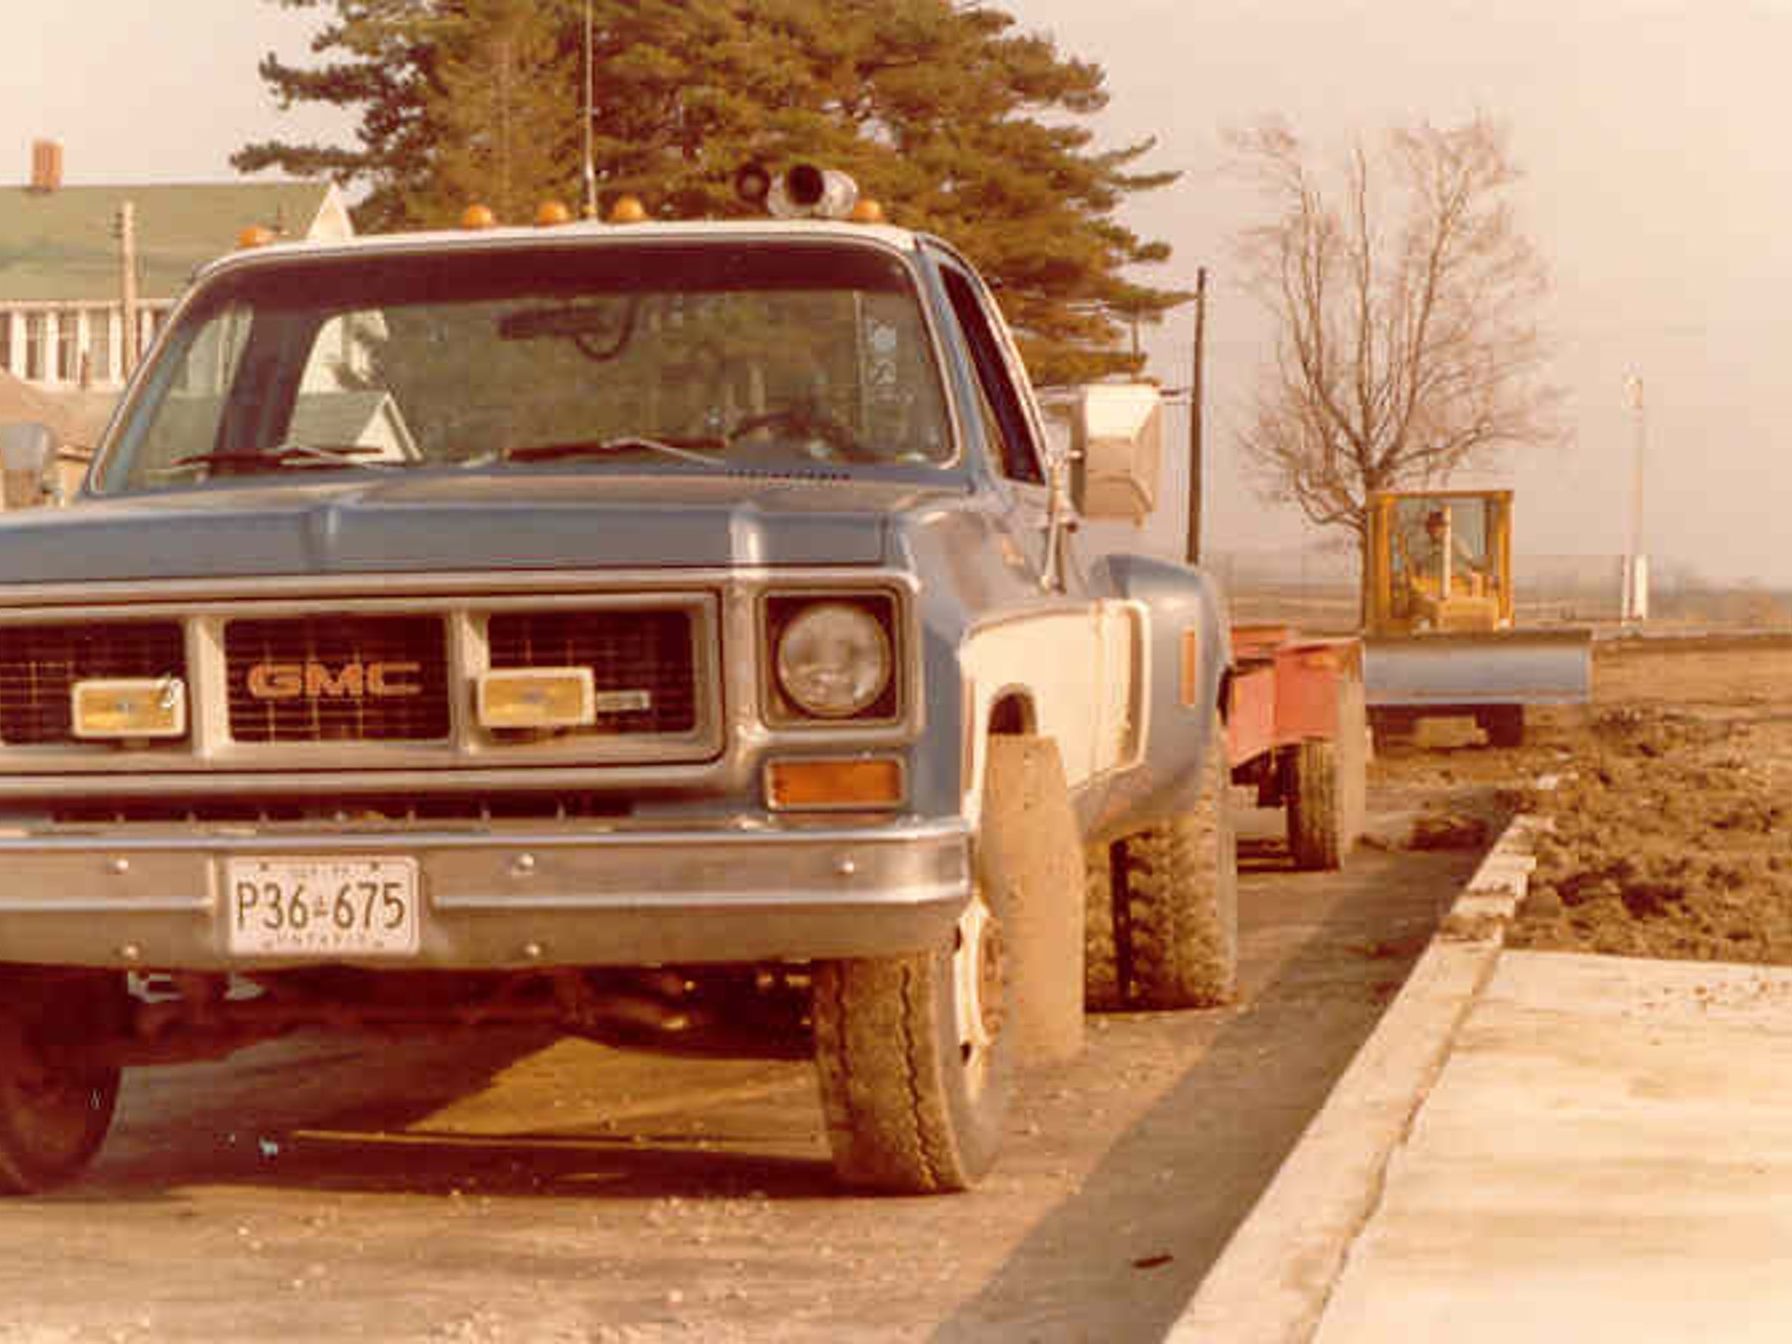 Vintage gmc truck is parked on the side of the road J-AAR History 